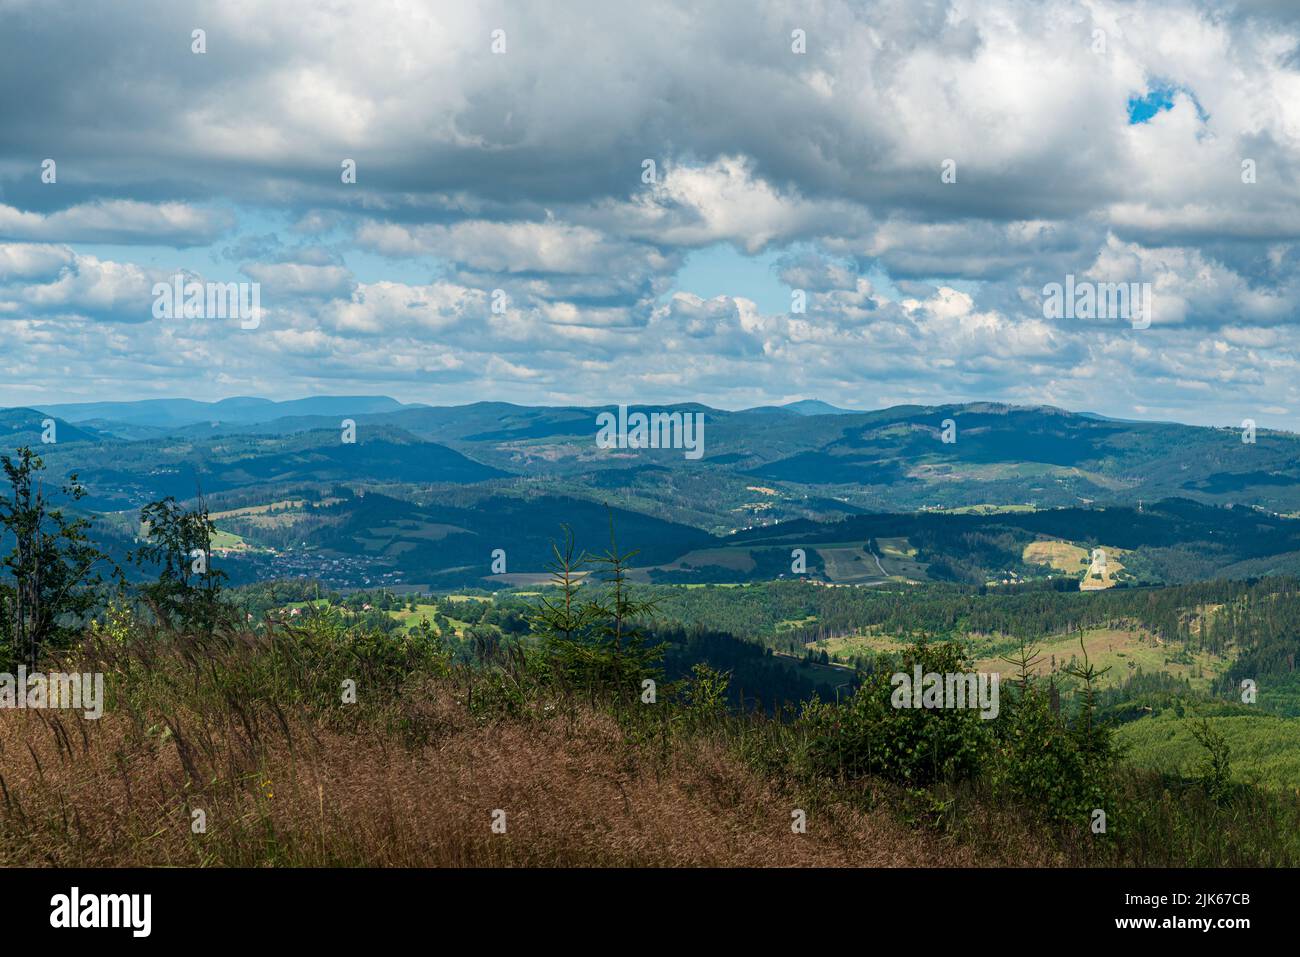 Moravskoslezske Beskydy mountains with highest Lysa hora hill from Javorske hill in Kysucke Beskydy mountains in Slovakia Stock Photo